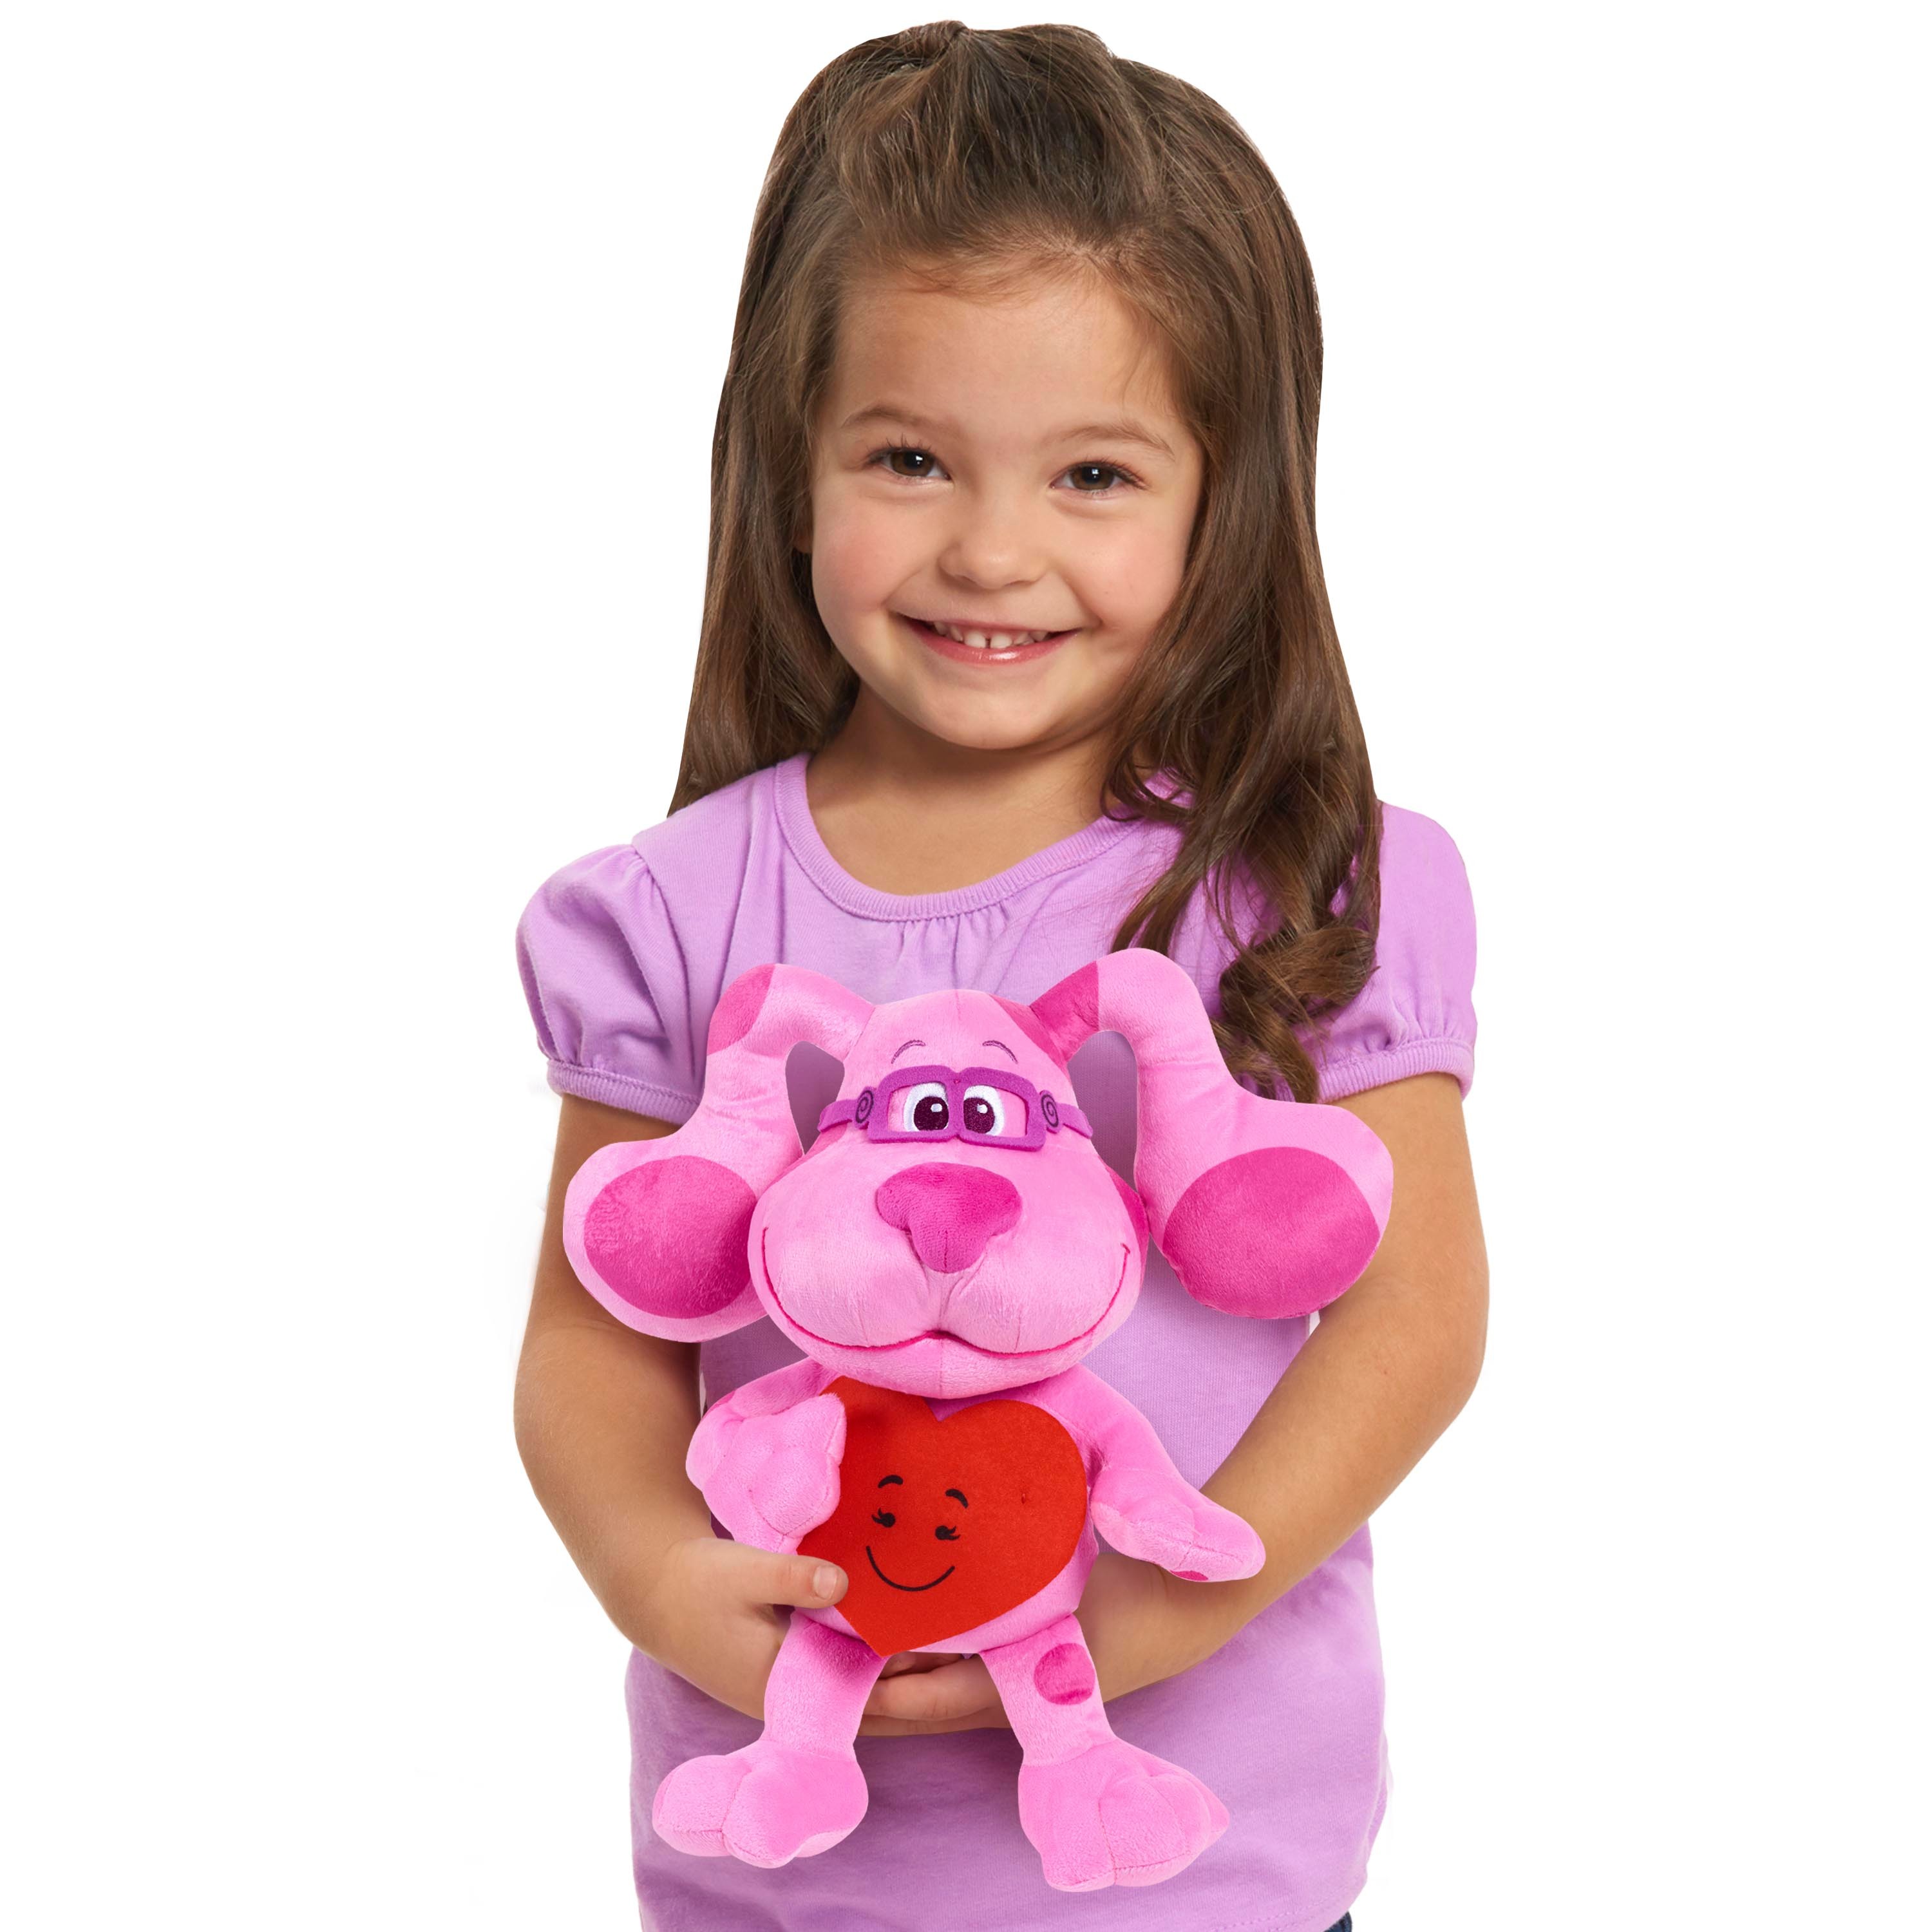 Blue’s Clues & You! Valentines Magenta, 12-inch Large Plush,  Kids Toys for Ages 3 Up, Gifts and Presents - image 2 of 3